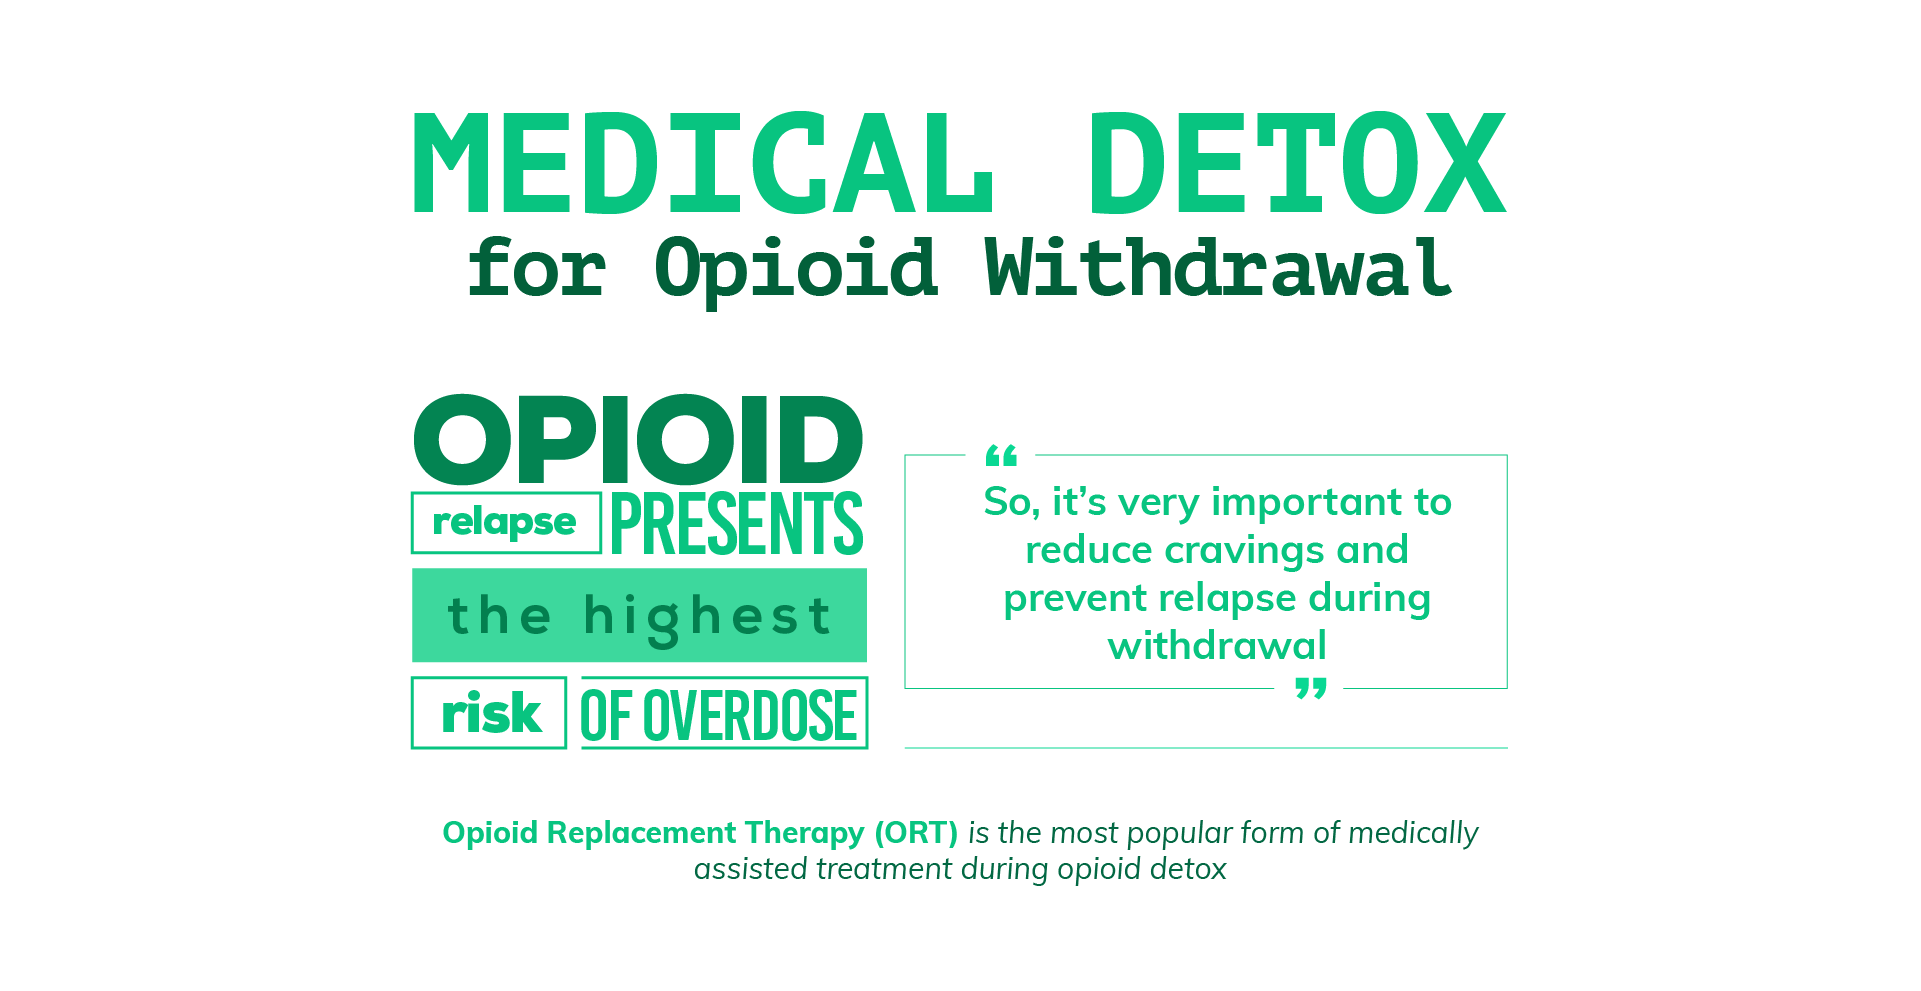 Medical Detox for Opioid Withdrawal